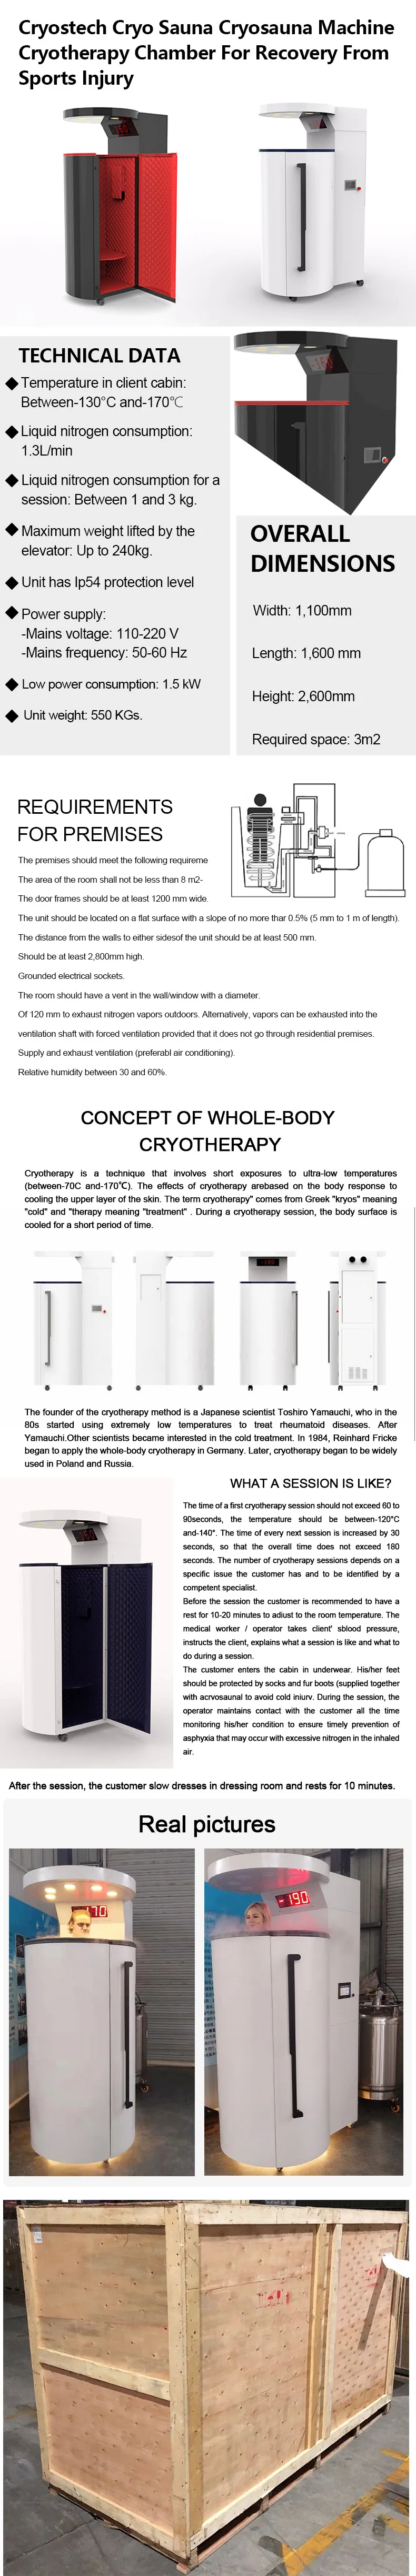 Cryotherapy meaning